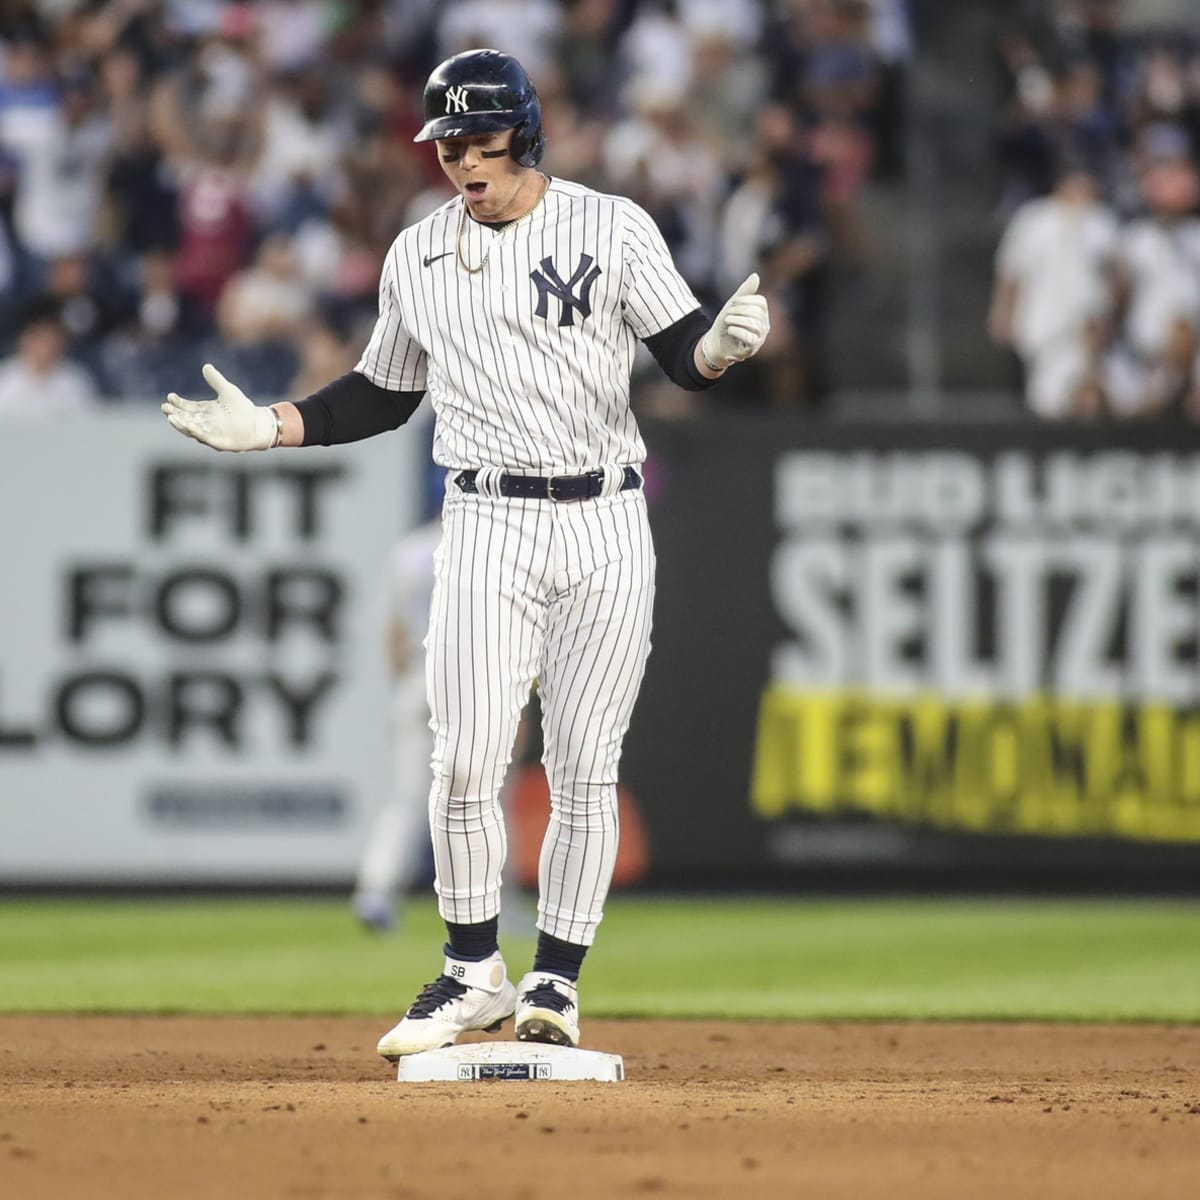 Yankees outfielder Clint Frazier ruled out for remainder of season